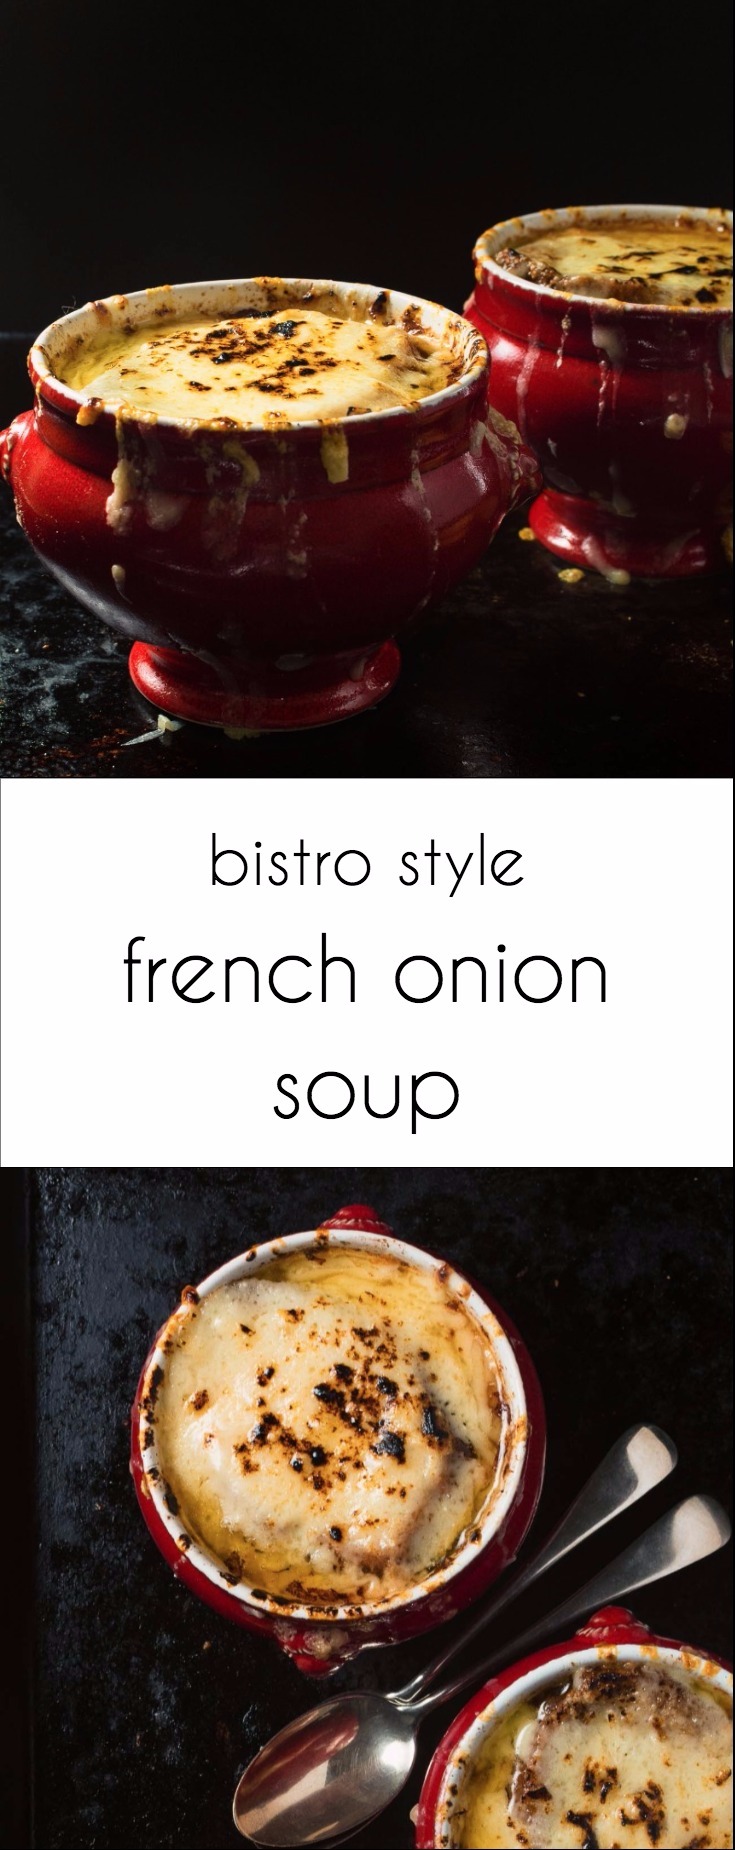 Warm up with this bistro style French onion soup. Comfort in a bowl!